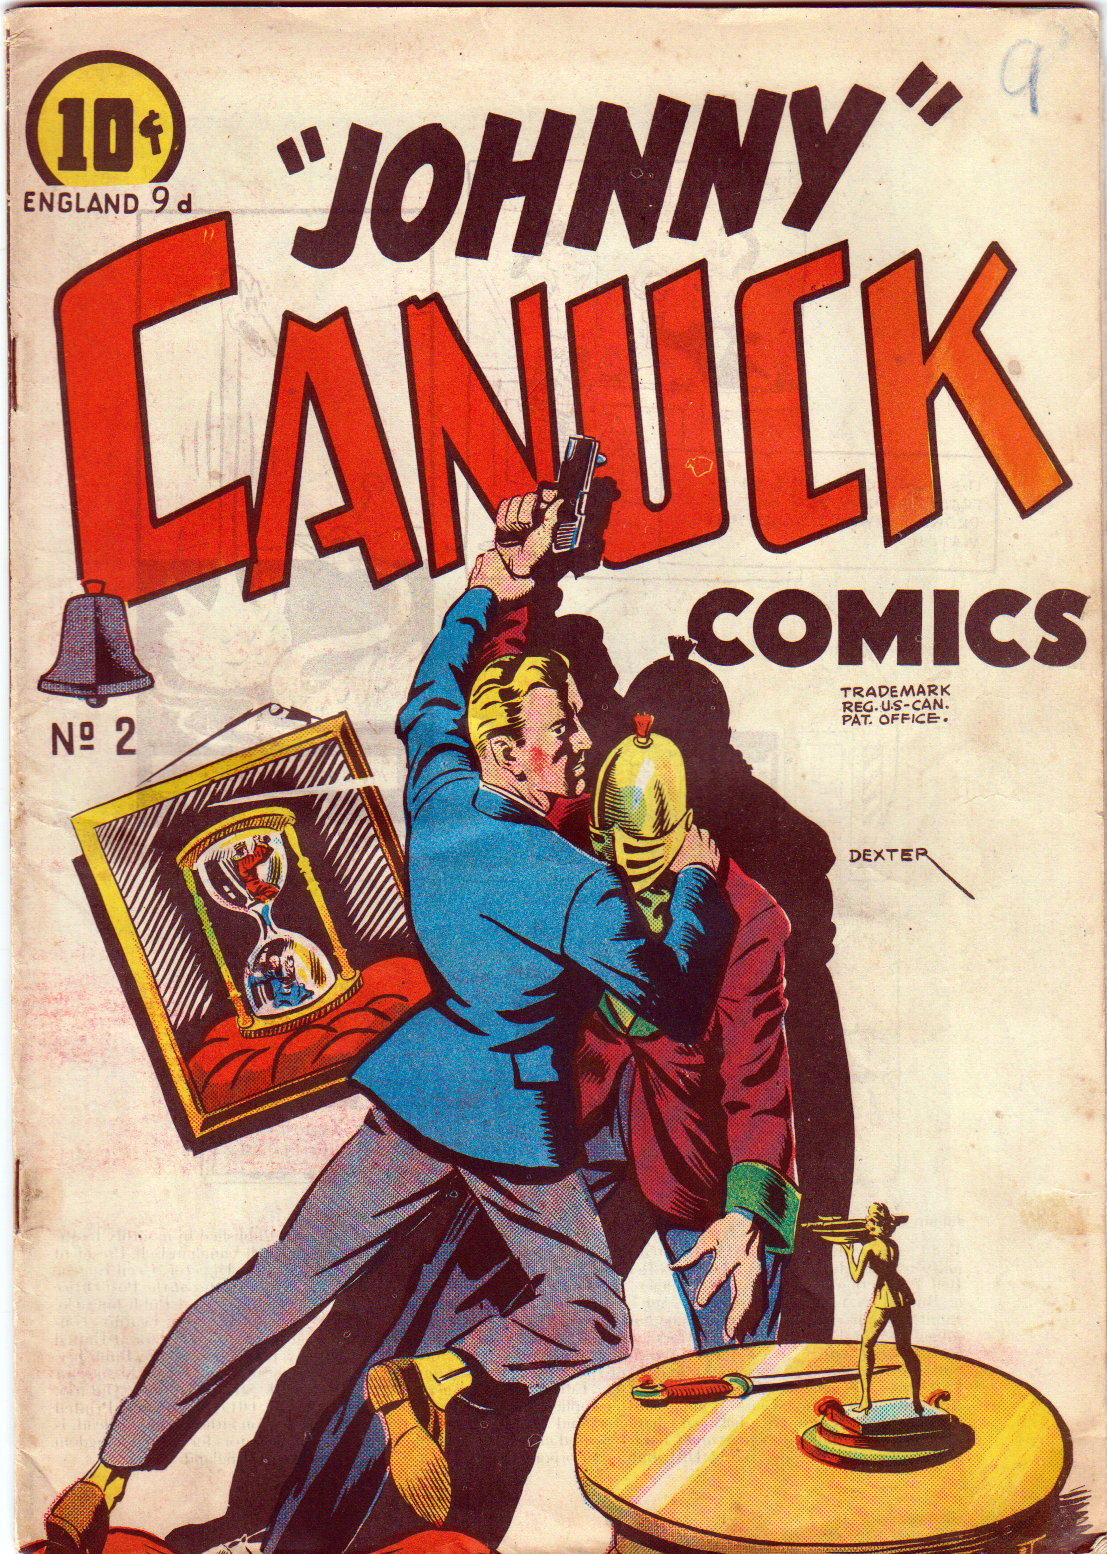 Canadian superhero Johnny Canuck is back in reprint of 1940s comic